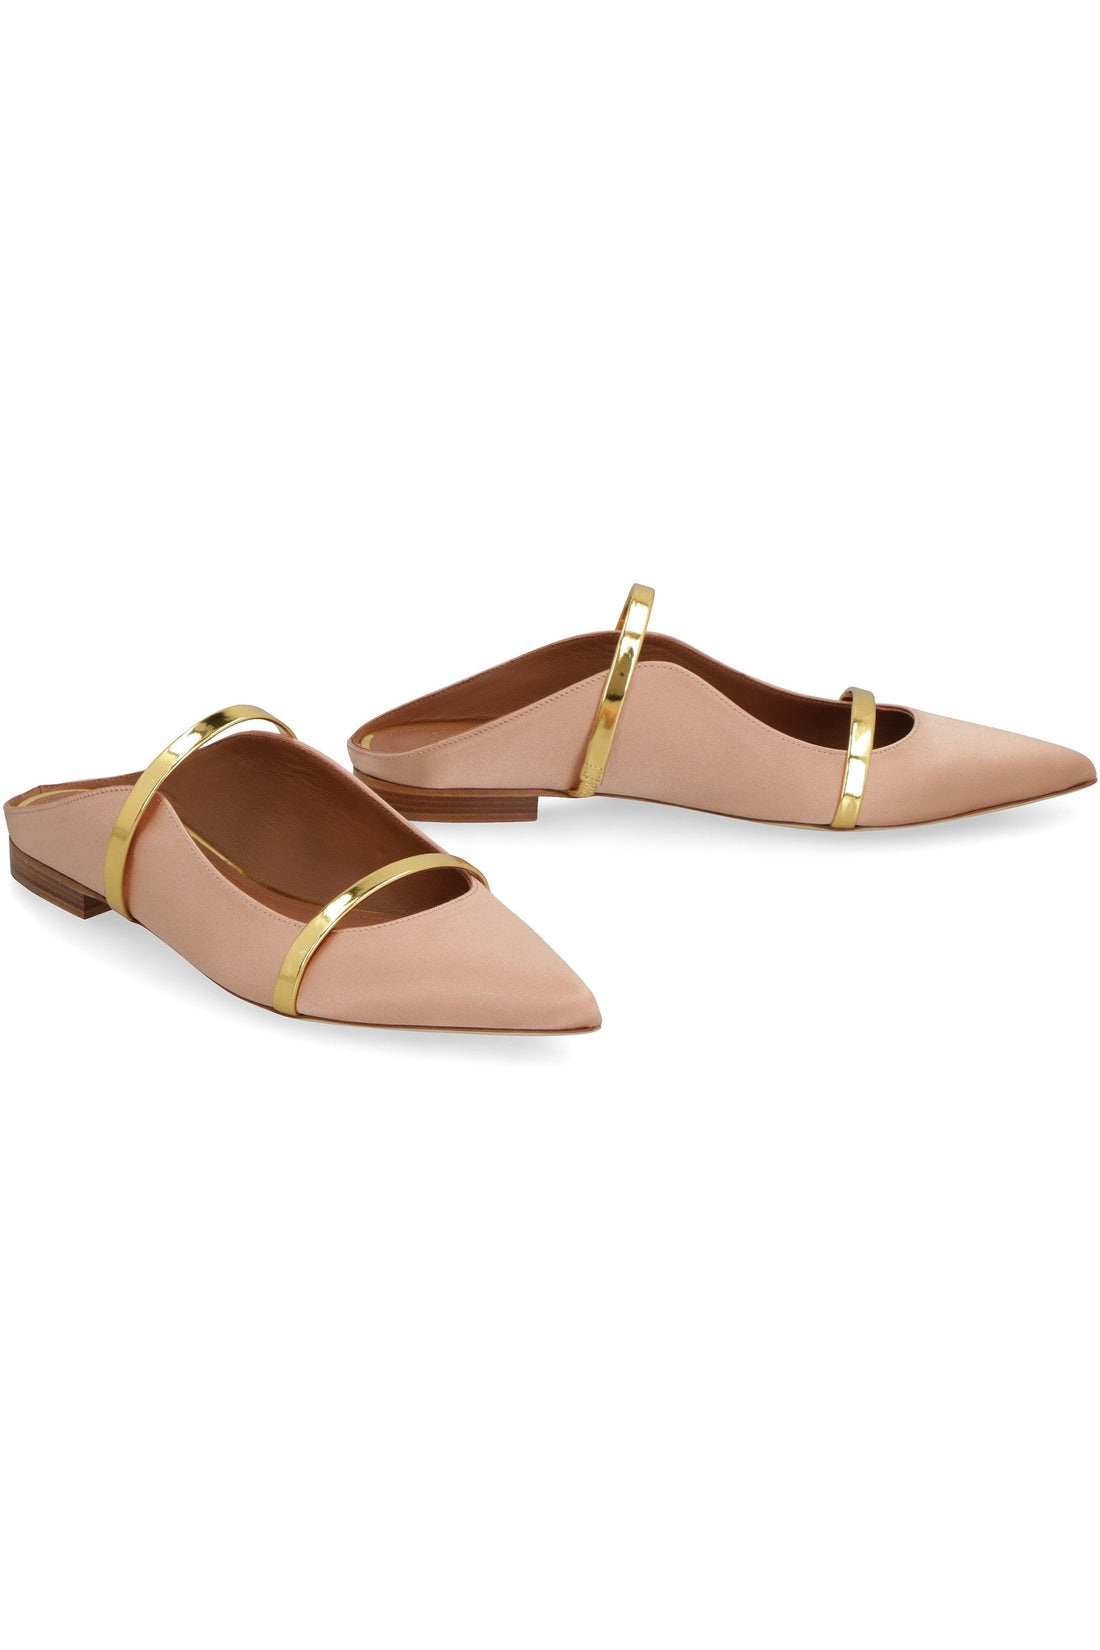 Malone Souliers-OUTLET-SALE-Maureen Flat pointy-toe ballet flats-ARCHIVIST